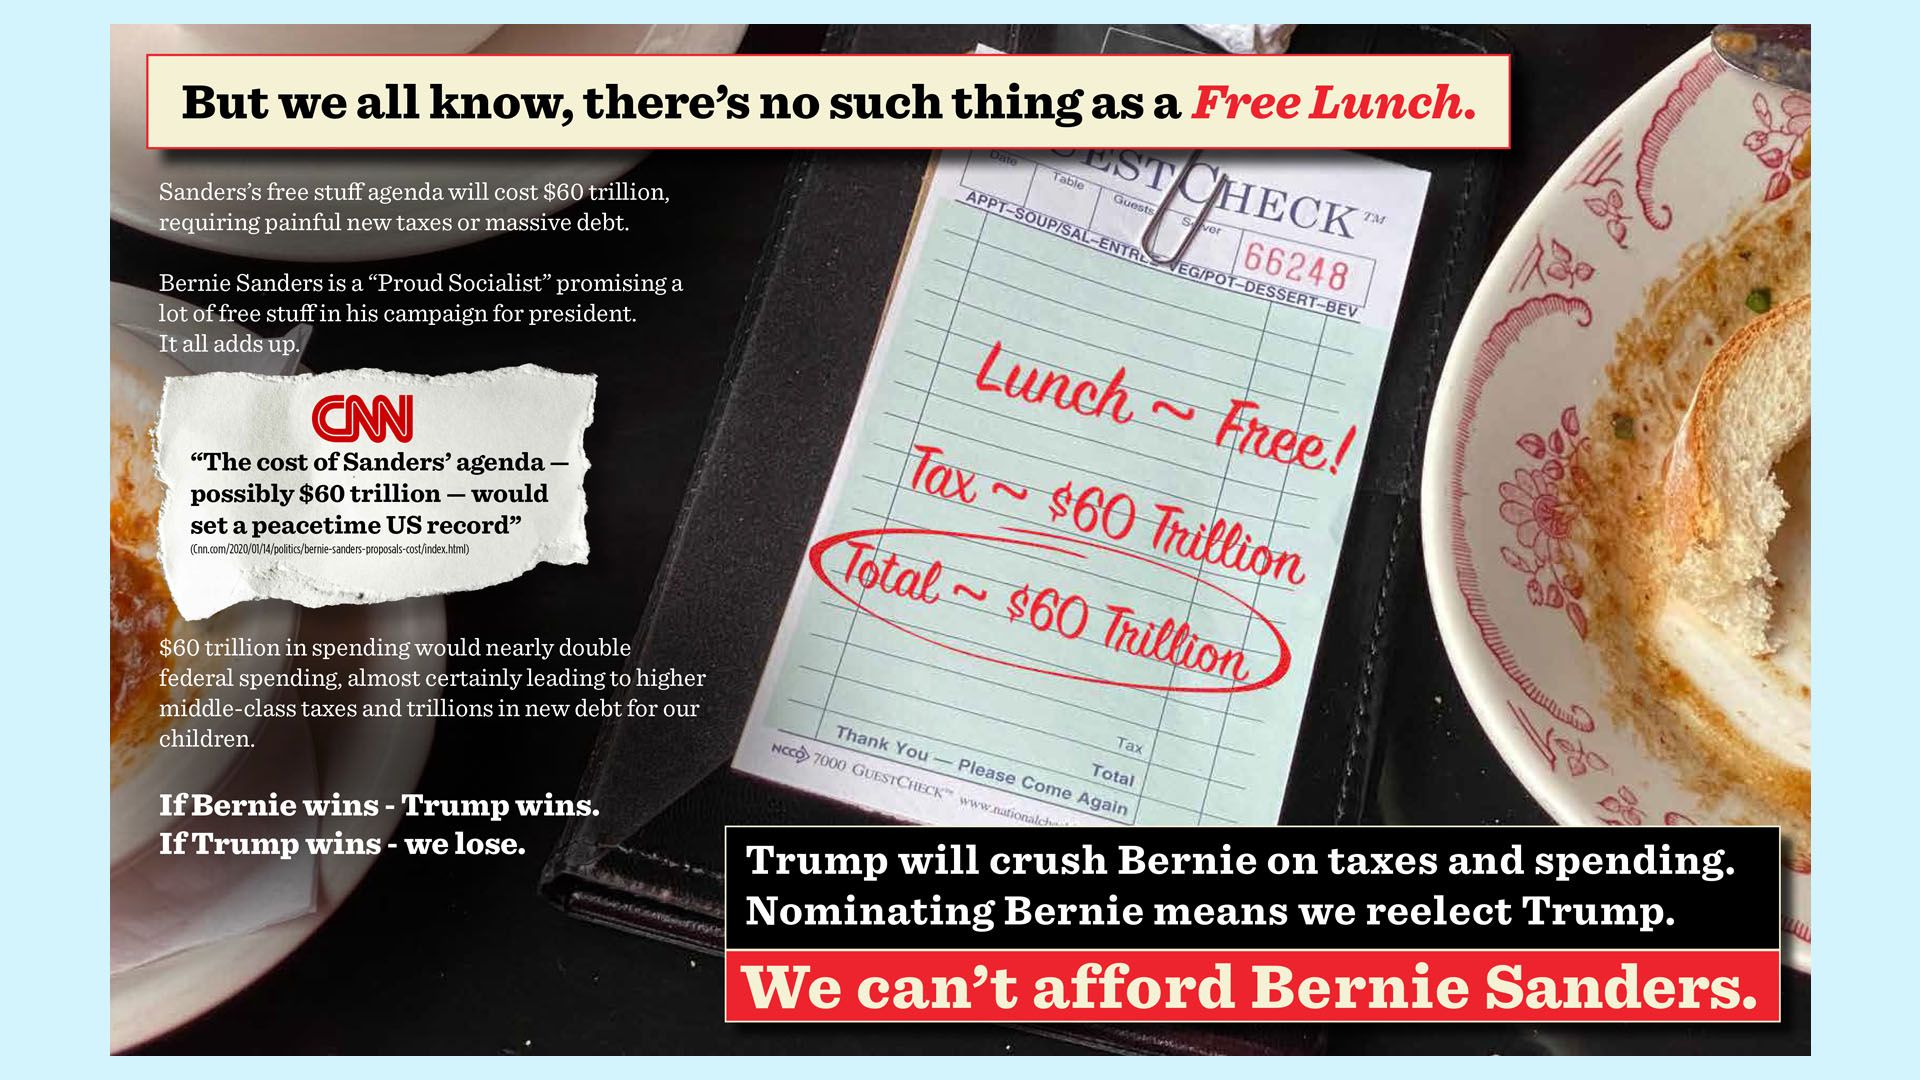 A photo of an anti-Bernie Sanders mailer that reads "We all know there's no such thing as Free Lunch!"